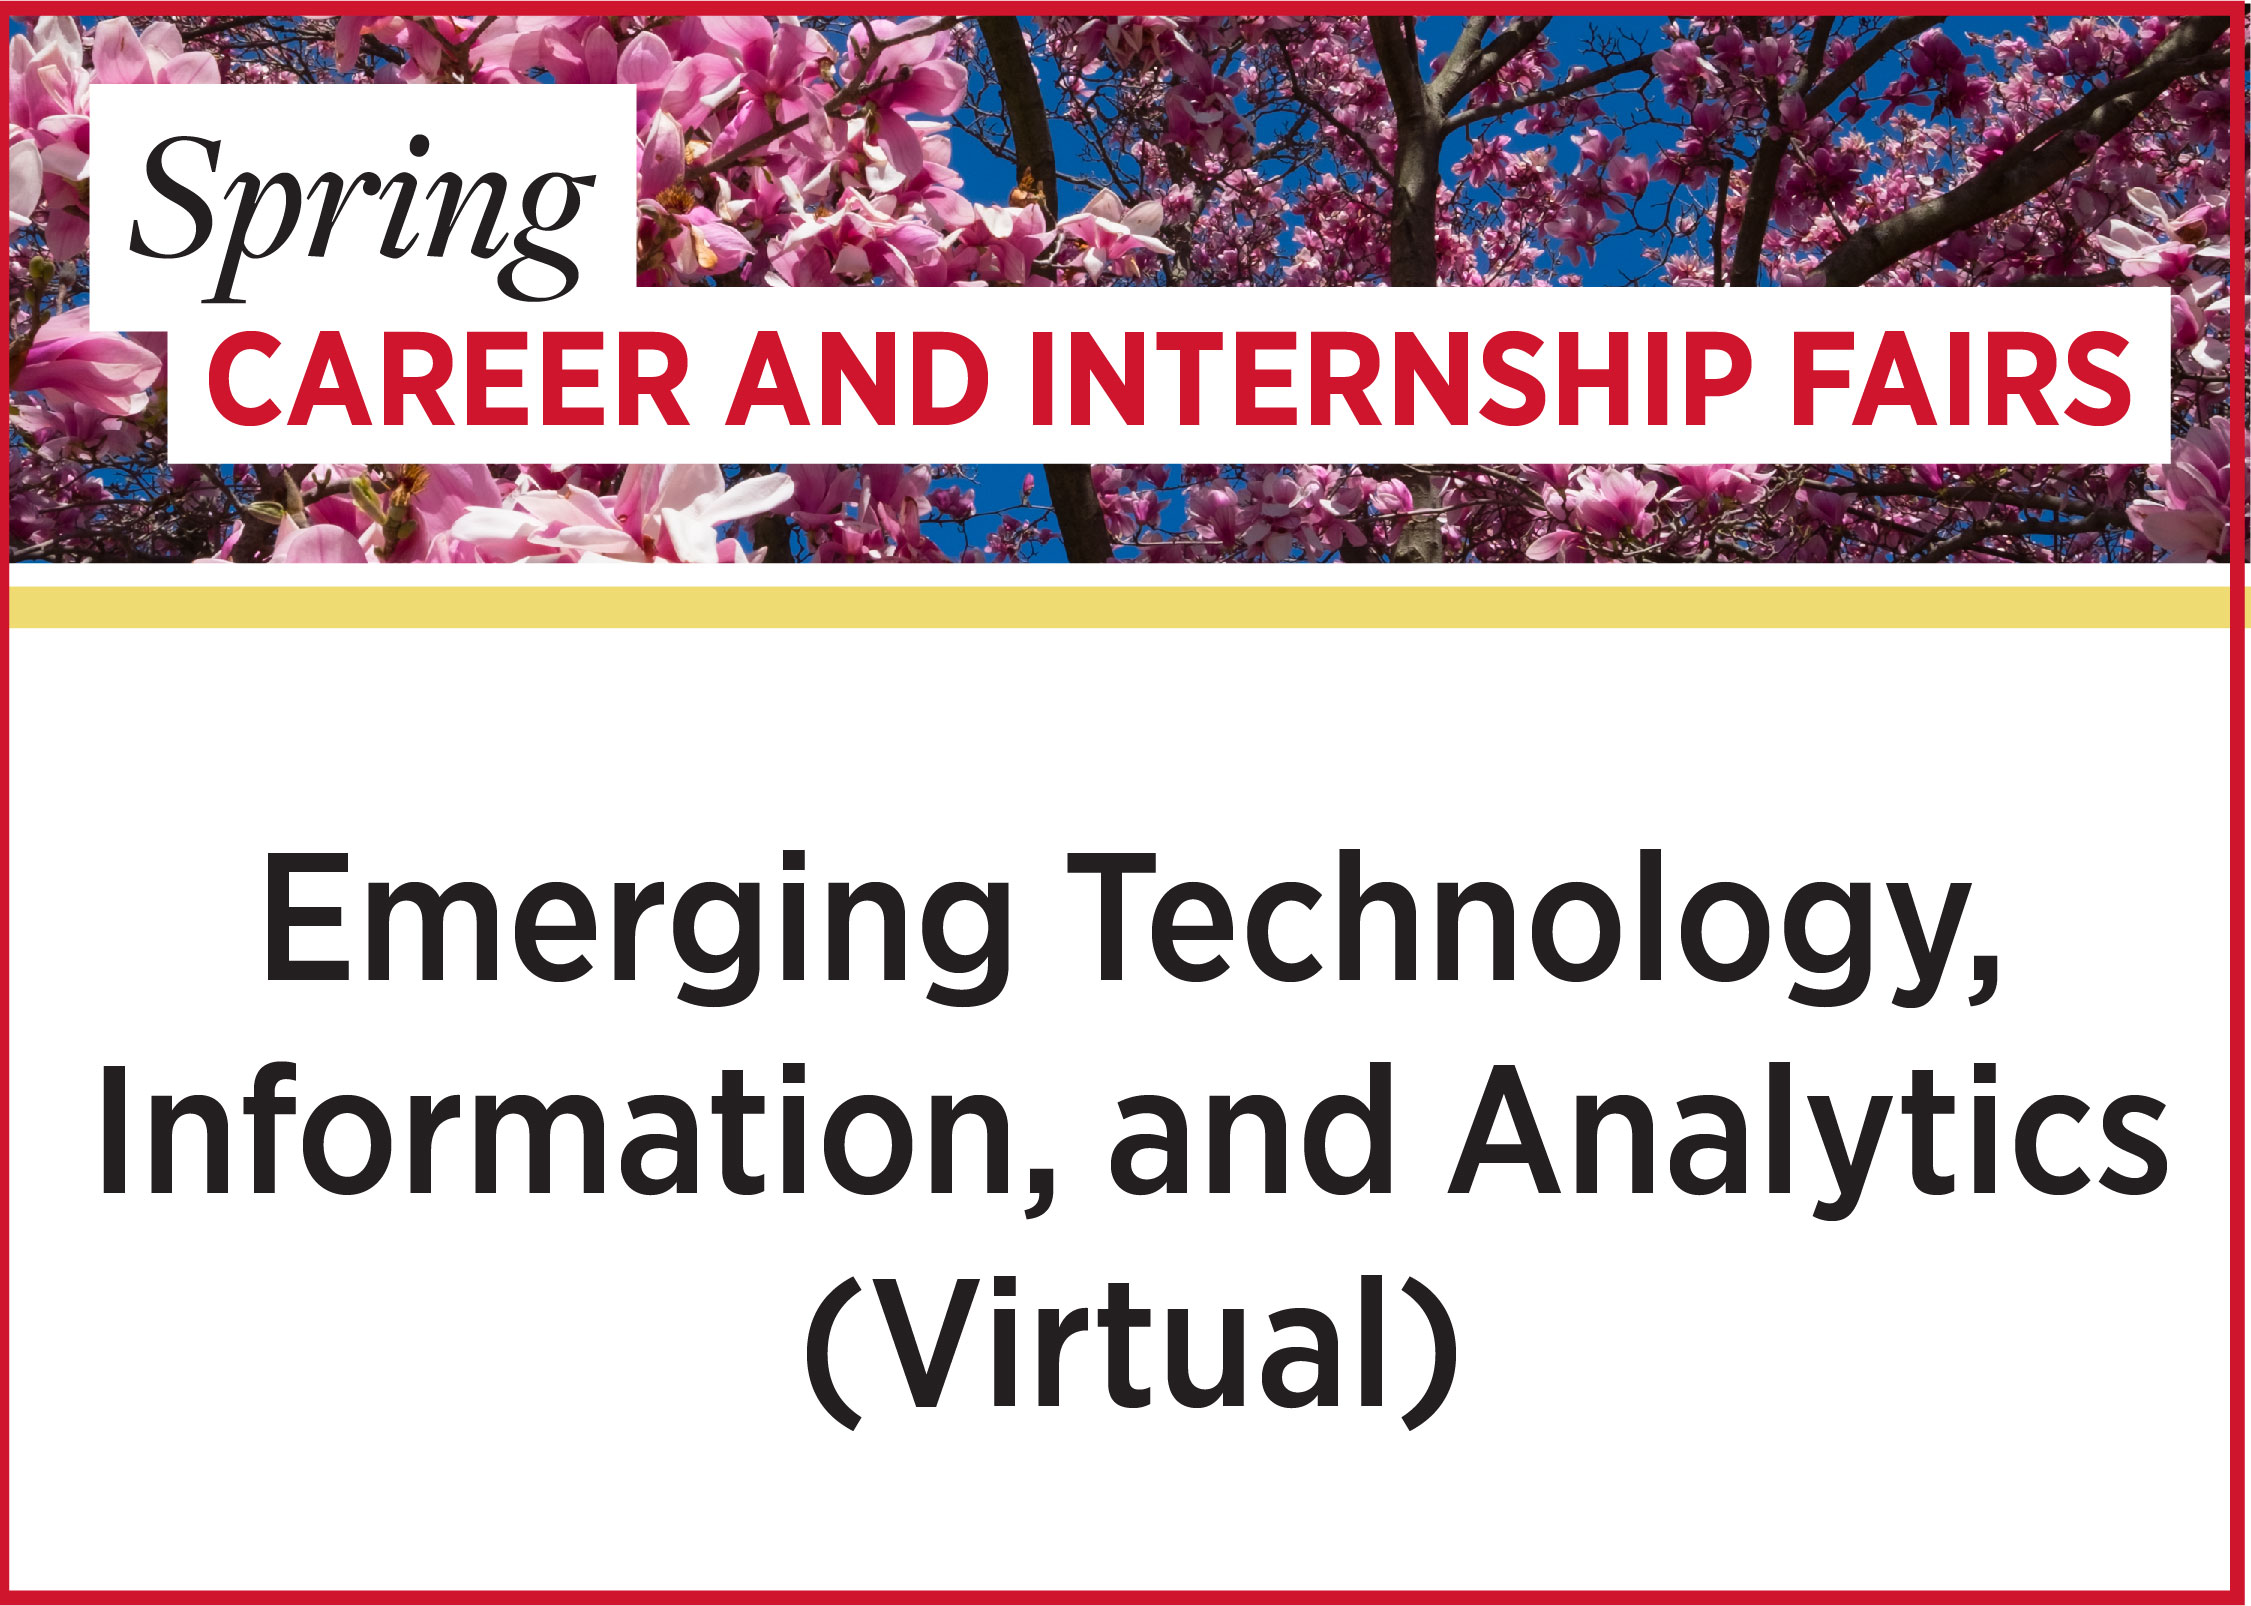 Spring Career and Internship Fairs - Emerging Technology, Information, and Analytics (Virtual)